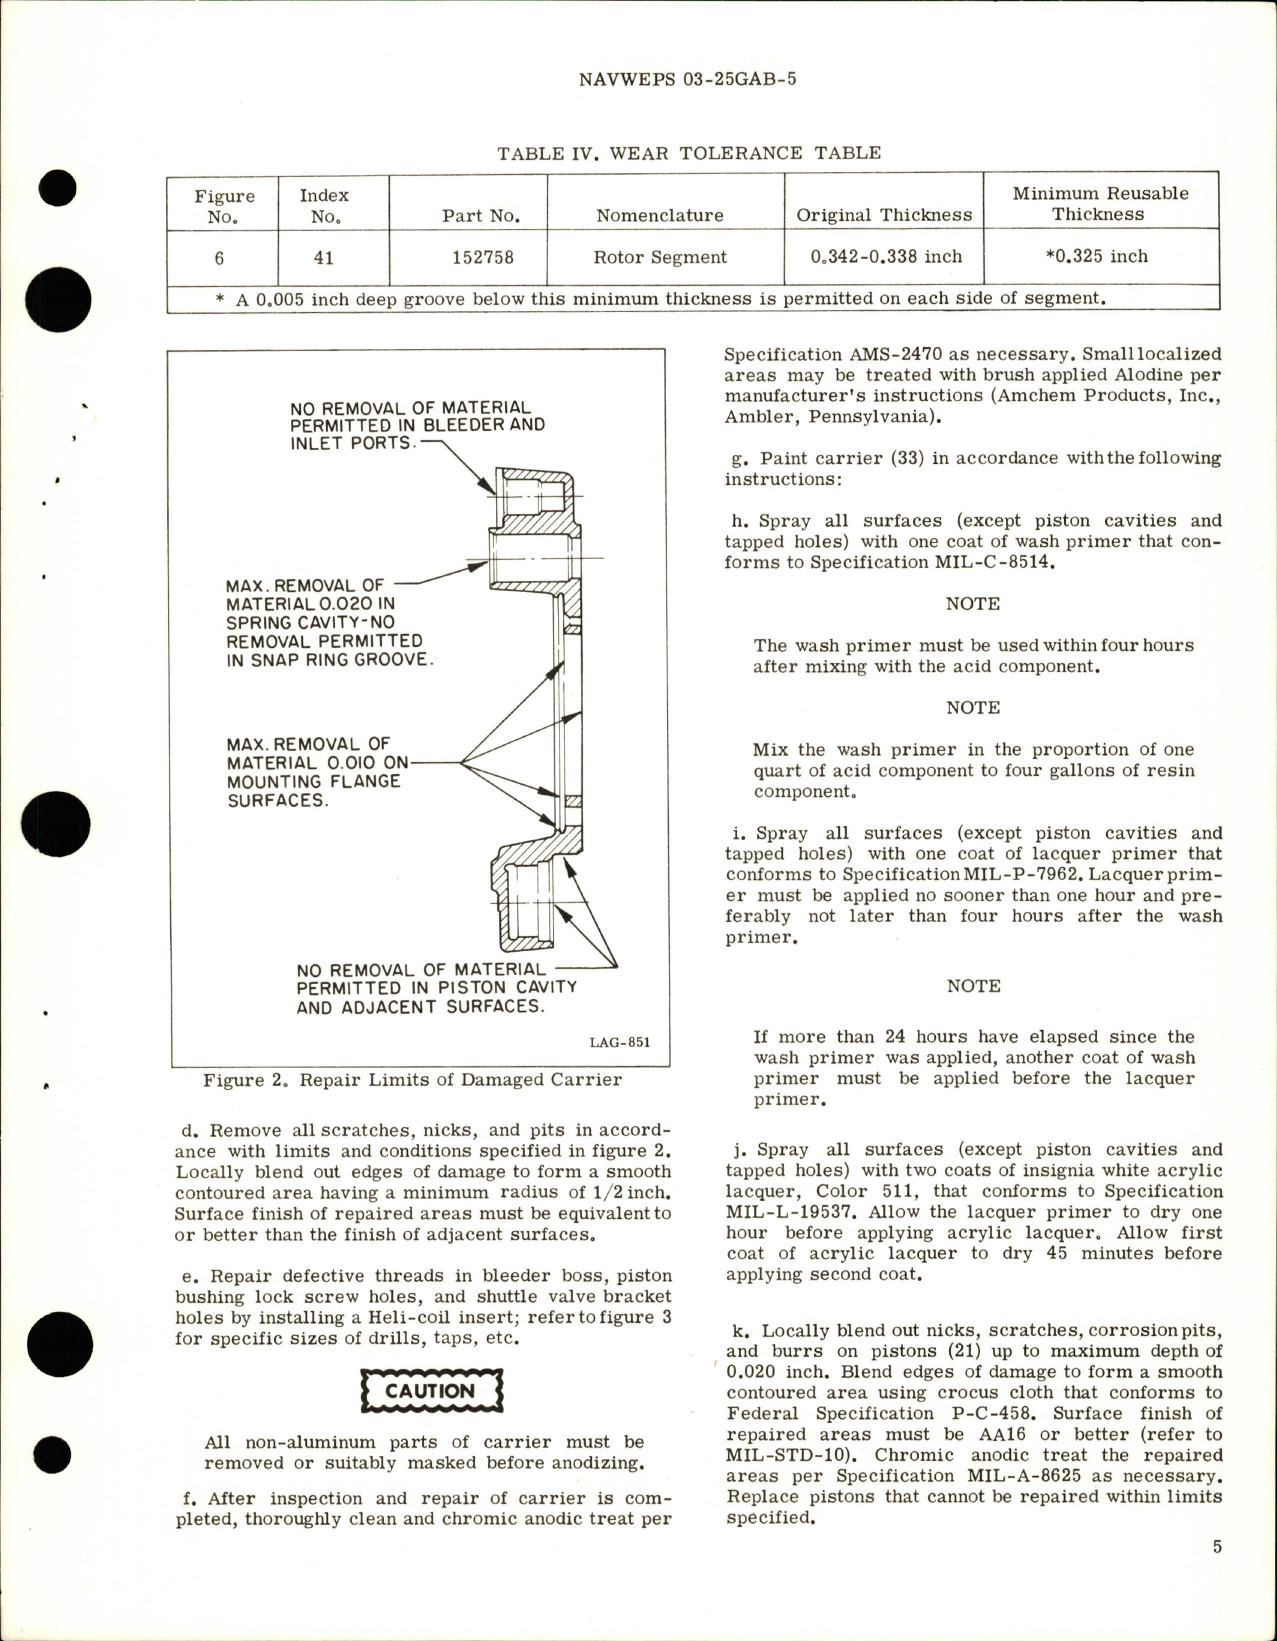 Sample page 7 from AirCorps Library document: Overhaul Instructions with Parts Breakdown for Brake Assembly - 13.81x8.19-3 Rotor - Part 153950-1